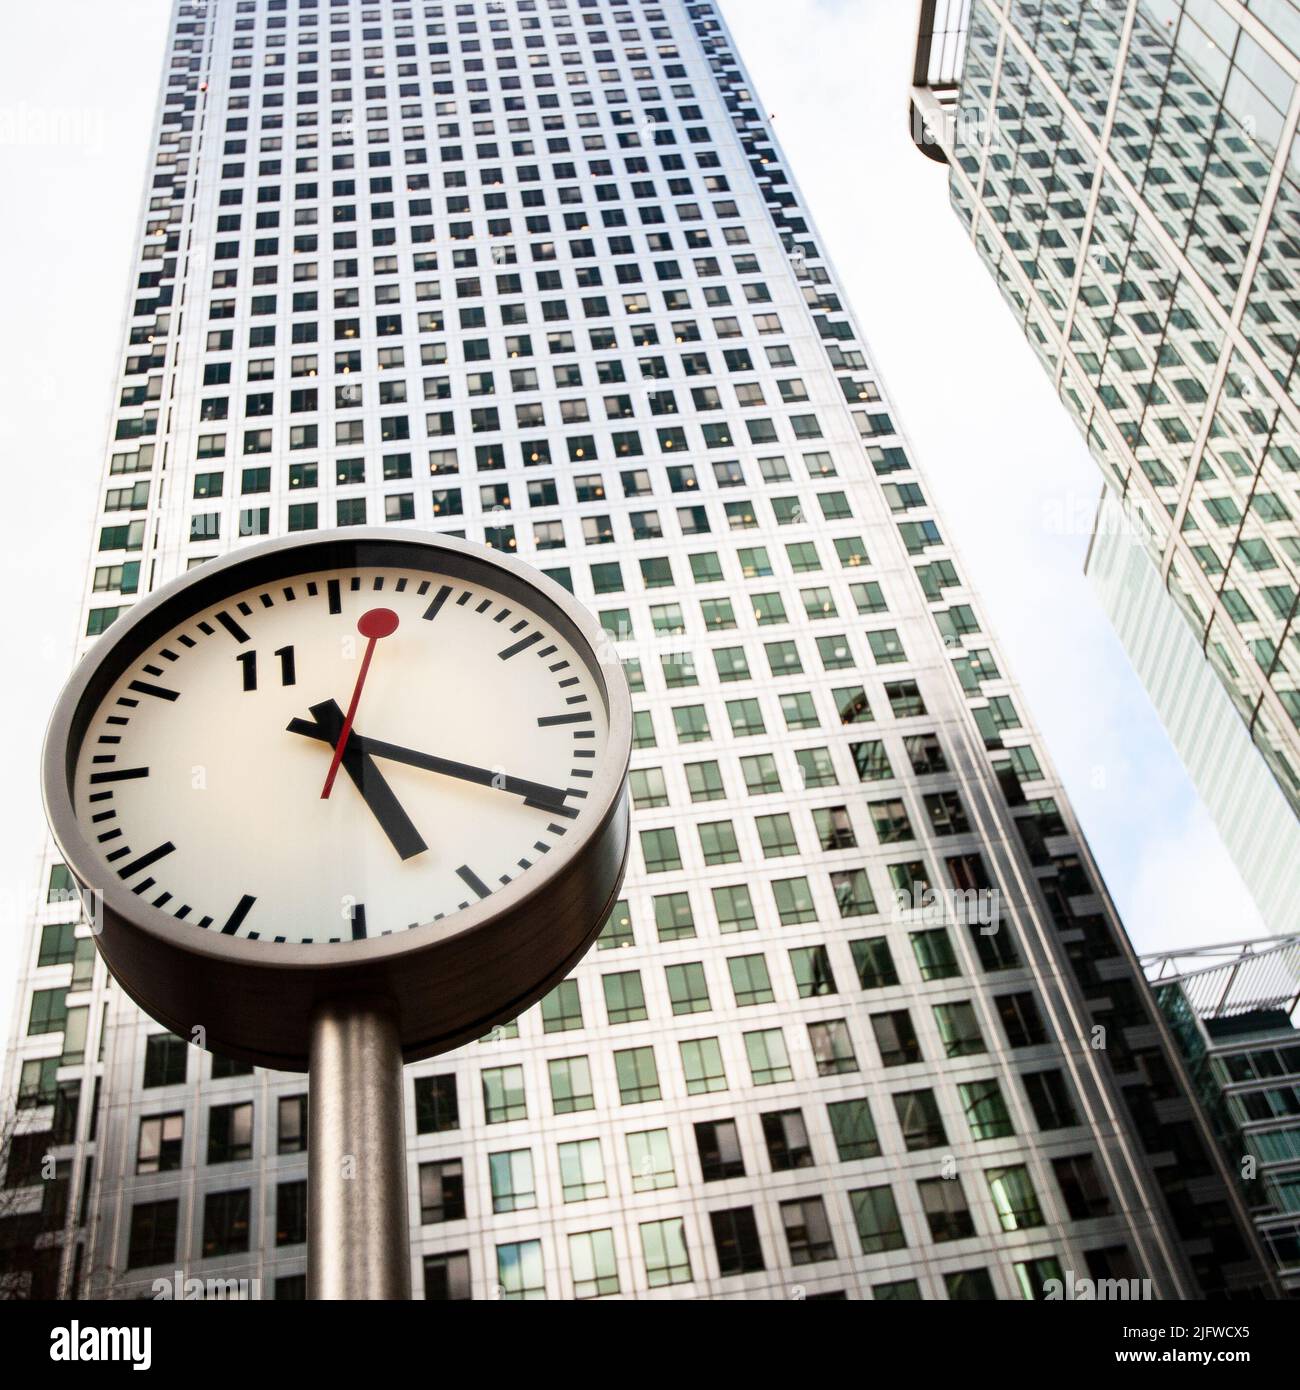 Docklands Clocks, London, UK. A low, wide angle view of Canary Wharf tower fronted by one of Konstantin Grcic's Six Public Clocks sculpture. Stock Photo